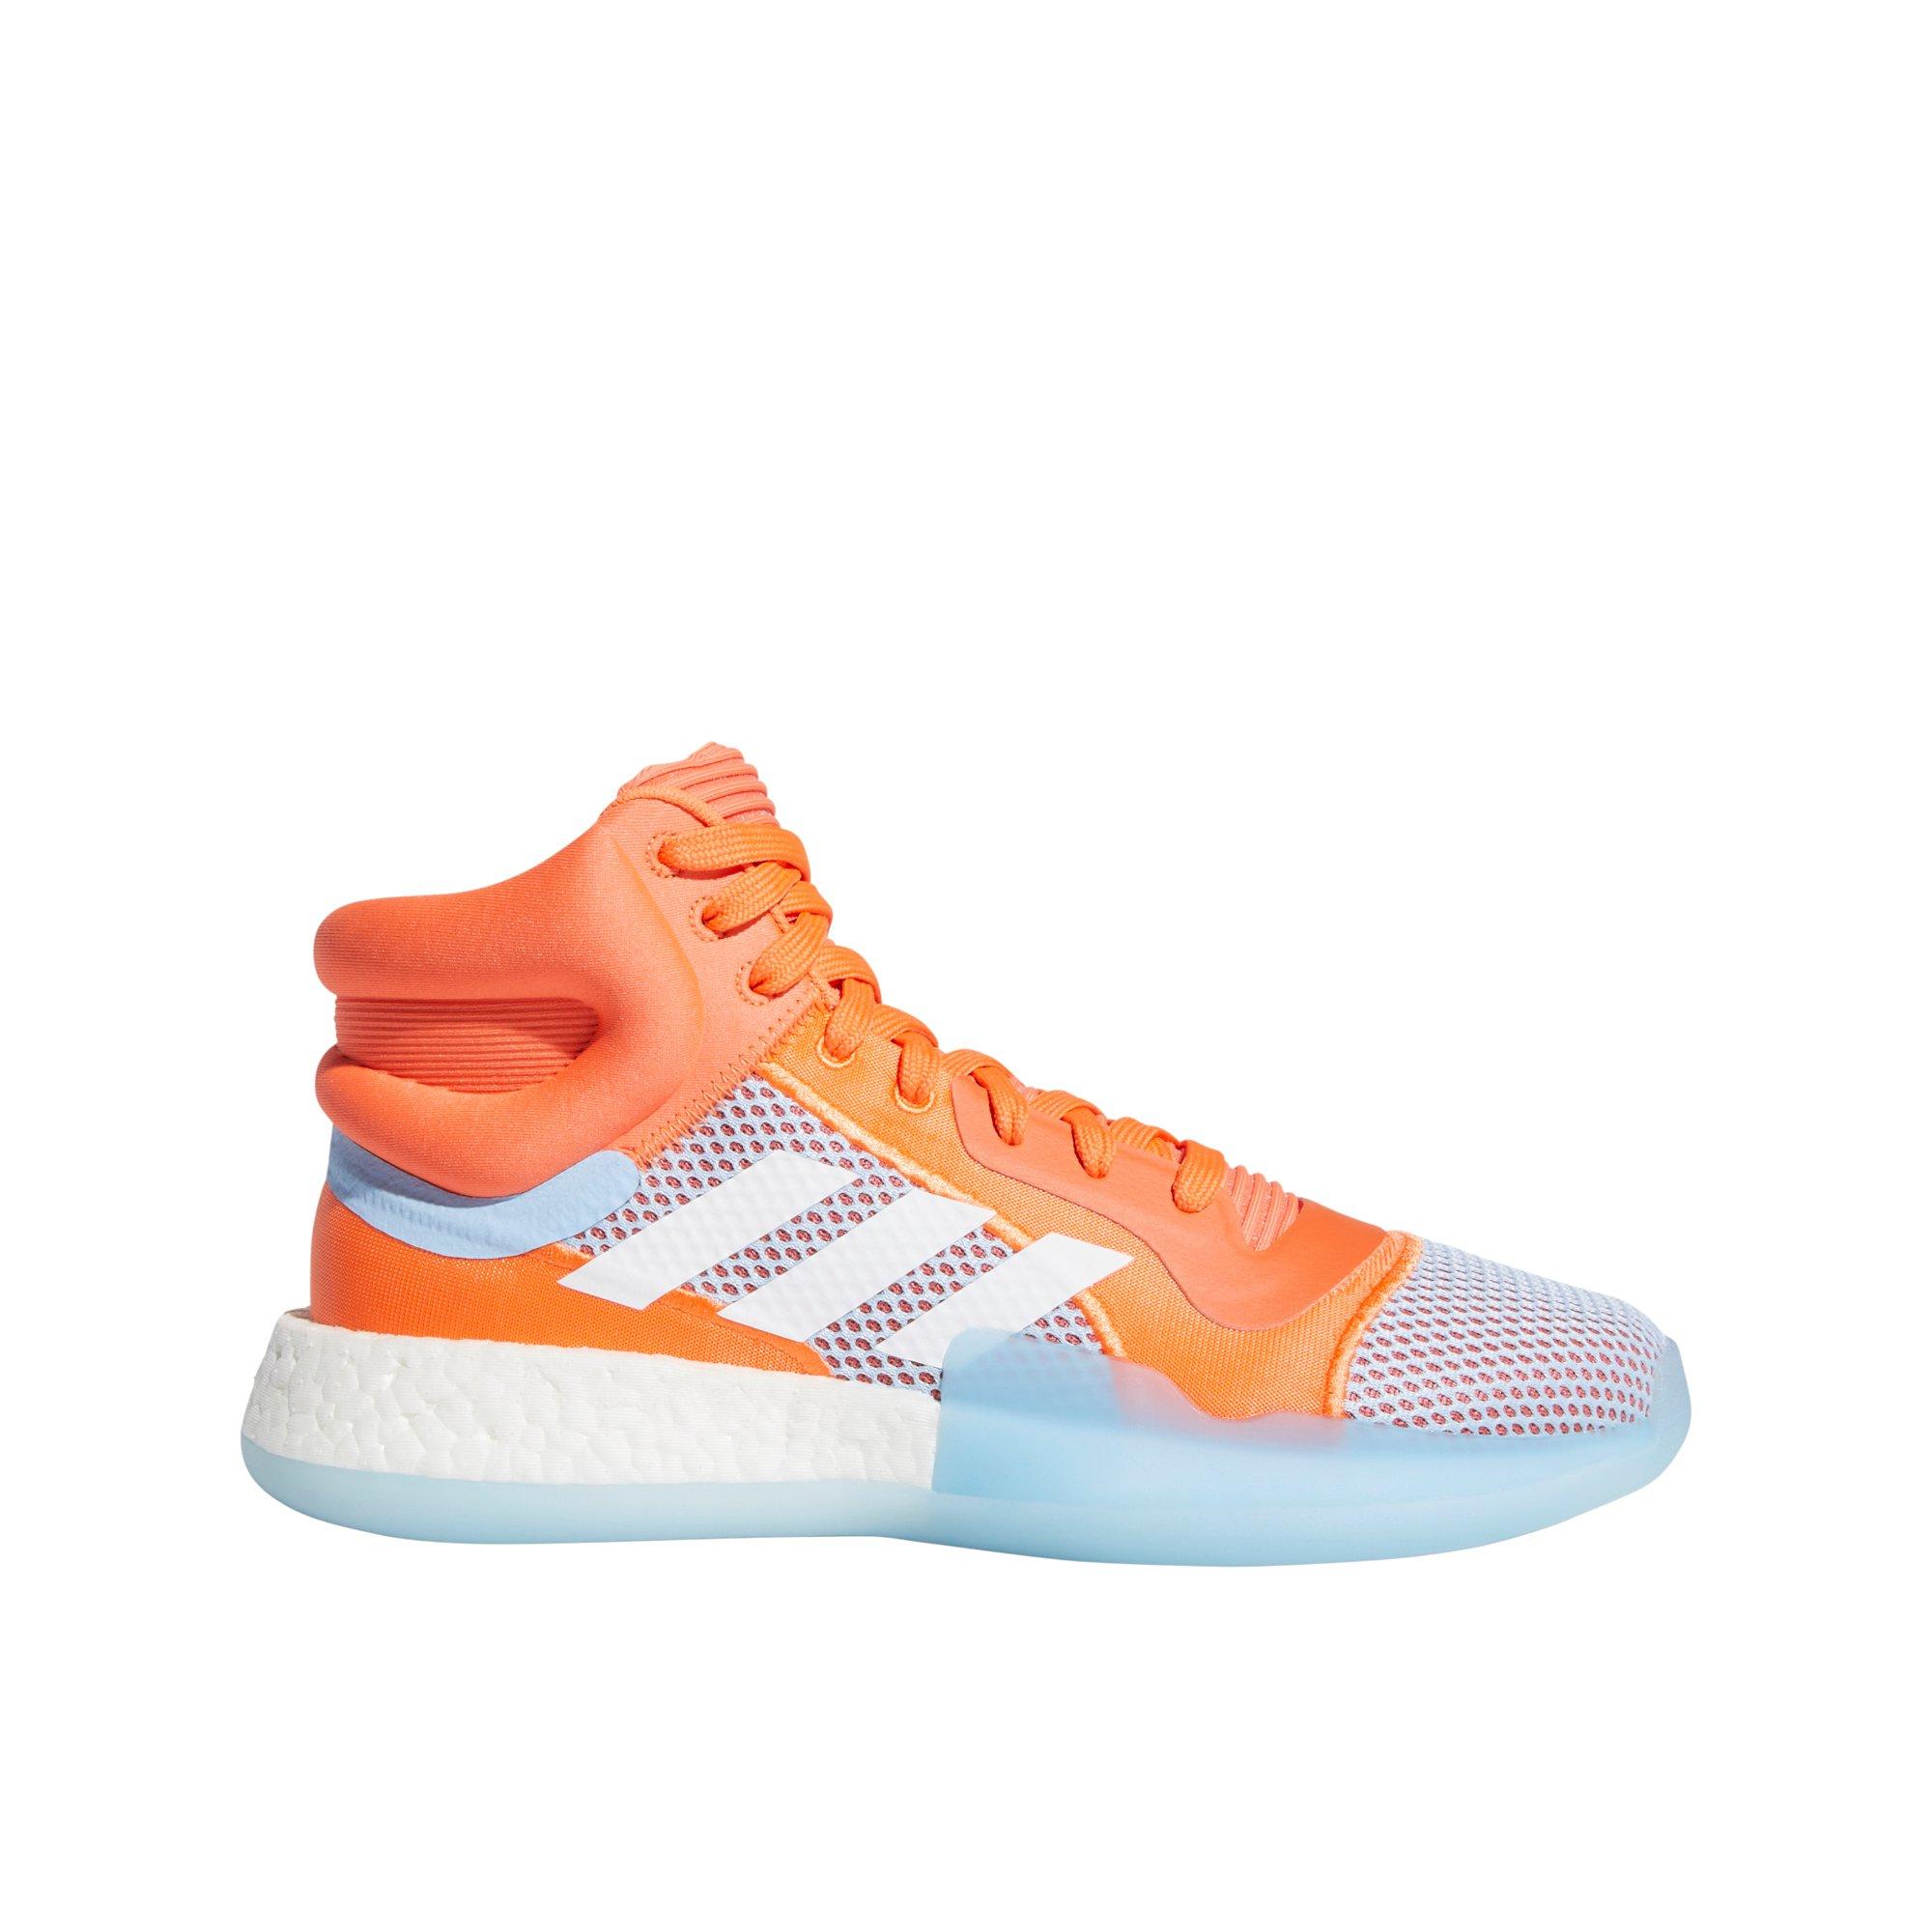 adidas marquee boost sizing